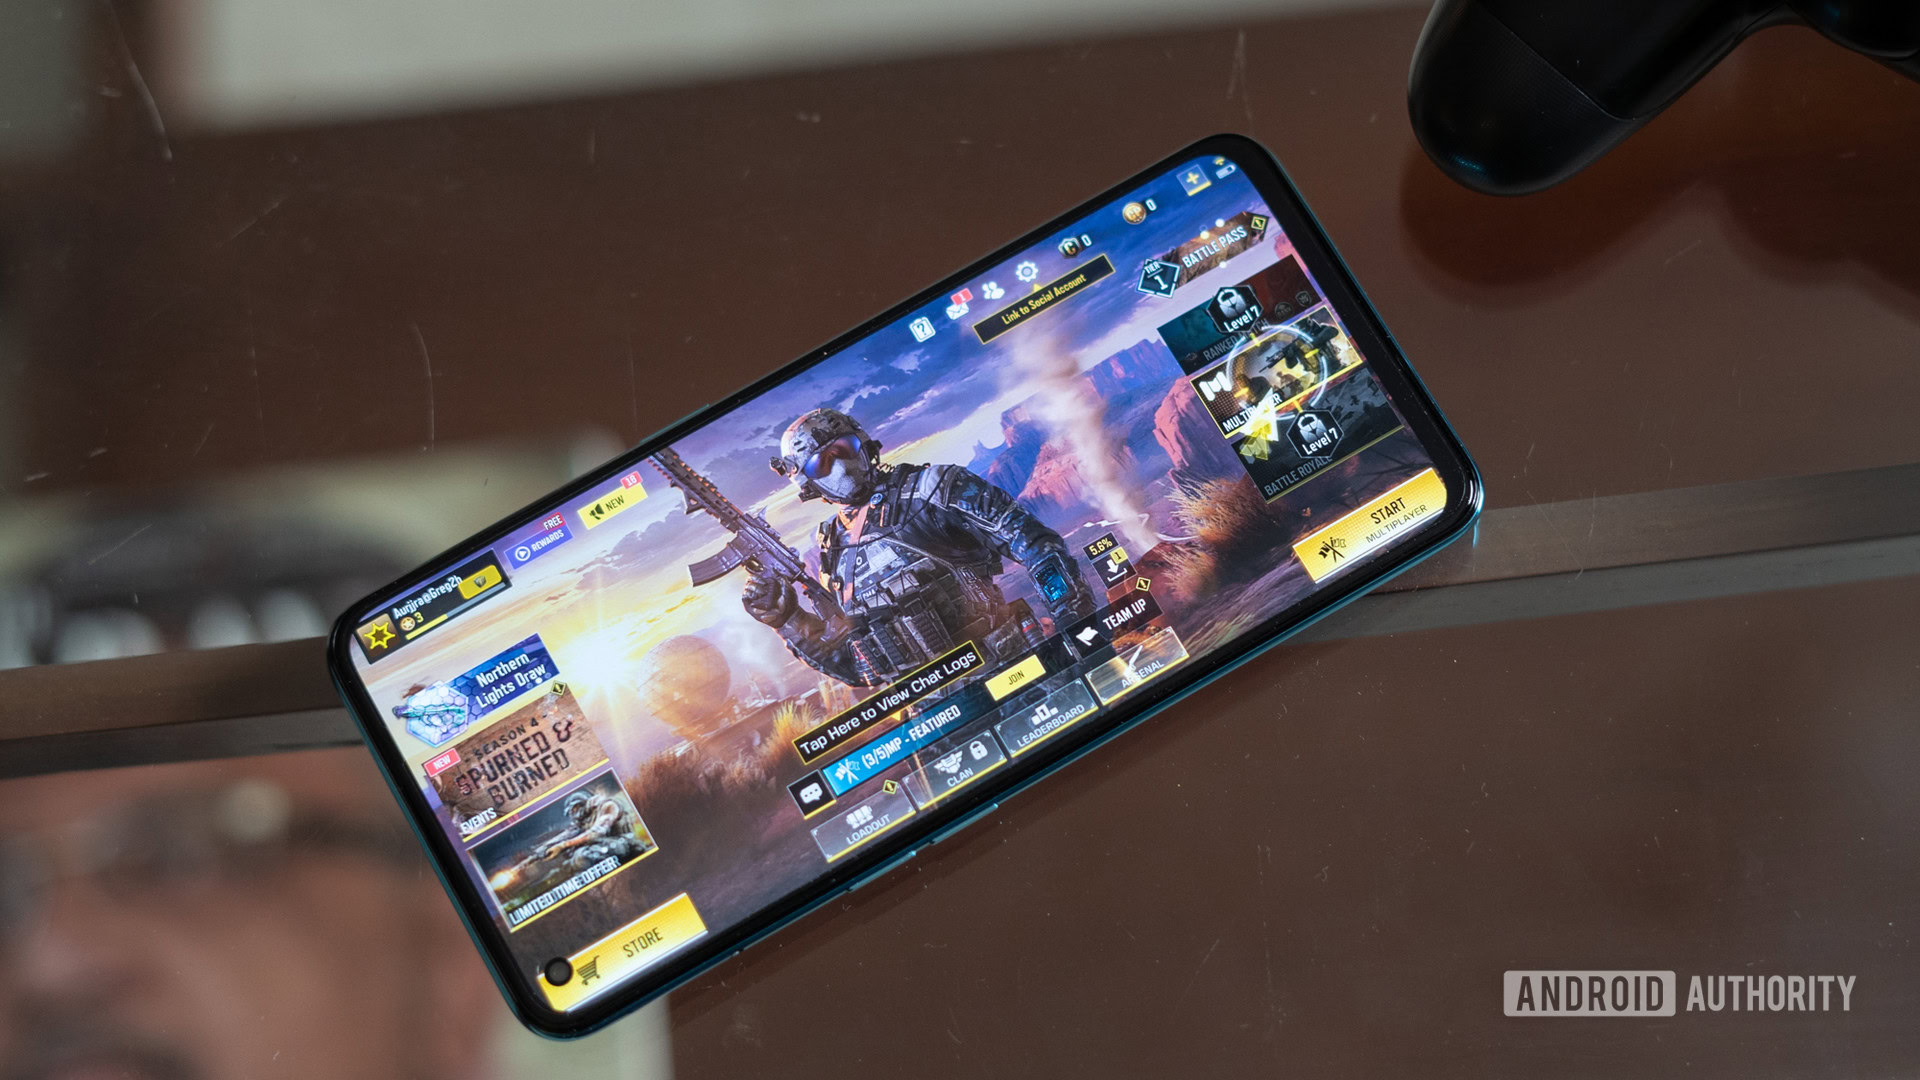 Top 5 games like COD Mobile for low-end Android devices in 2021